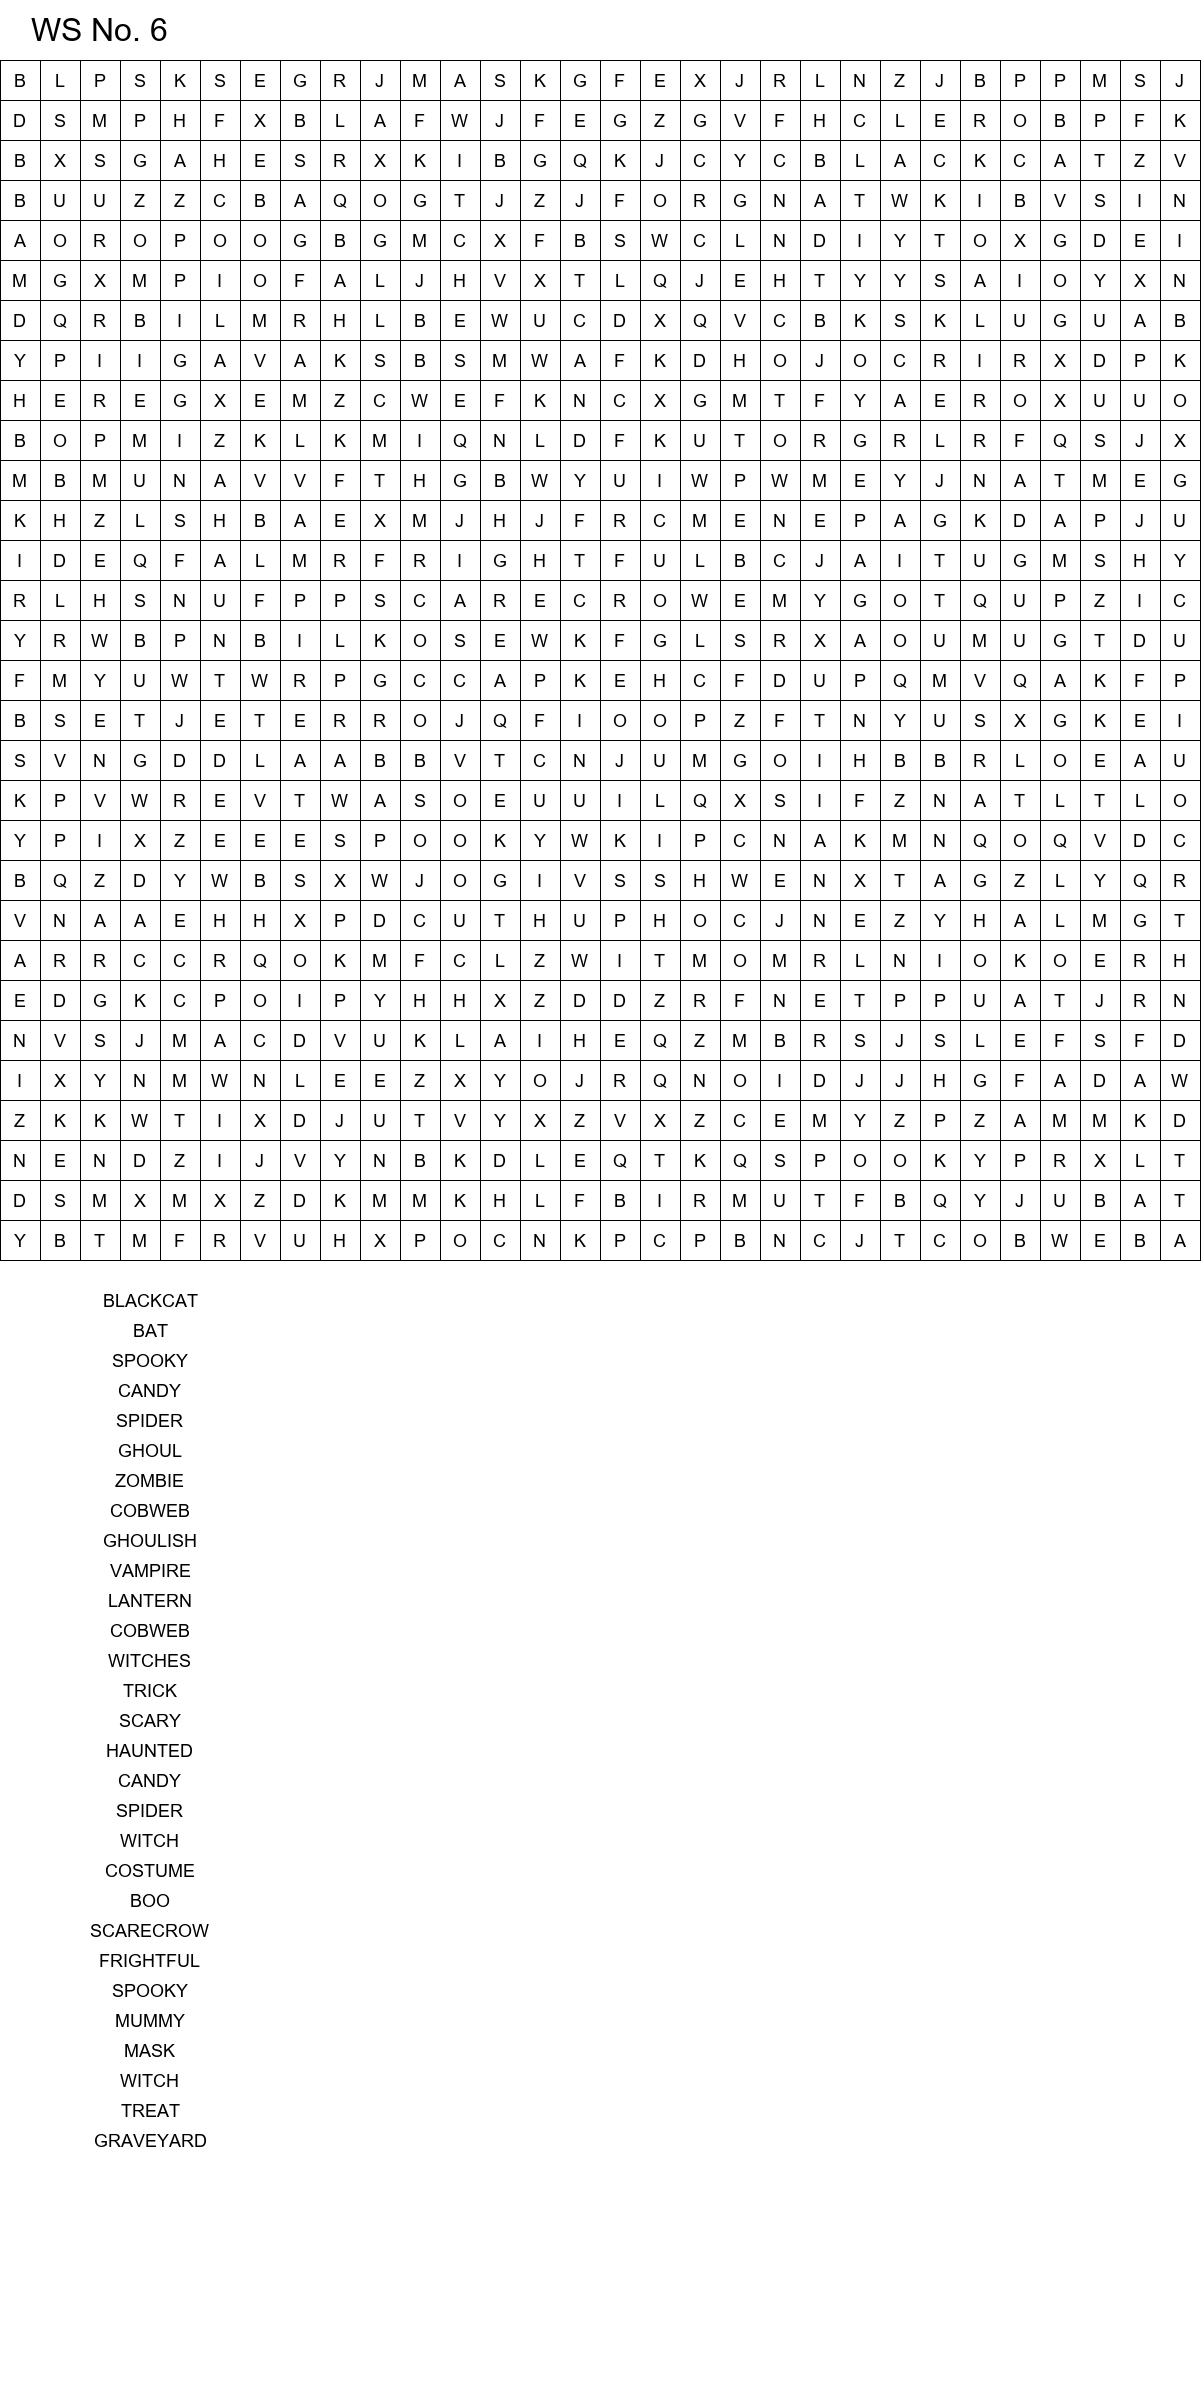 Challenging Halloween word search for adults size 30x30 No 6